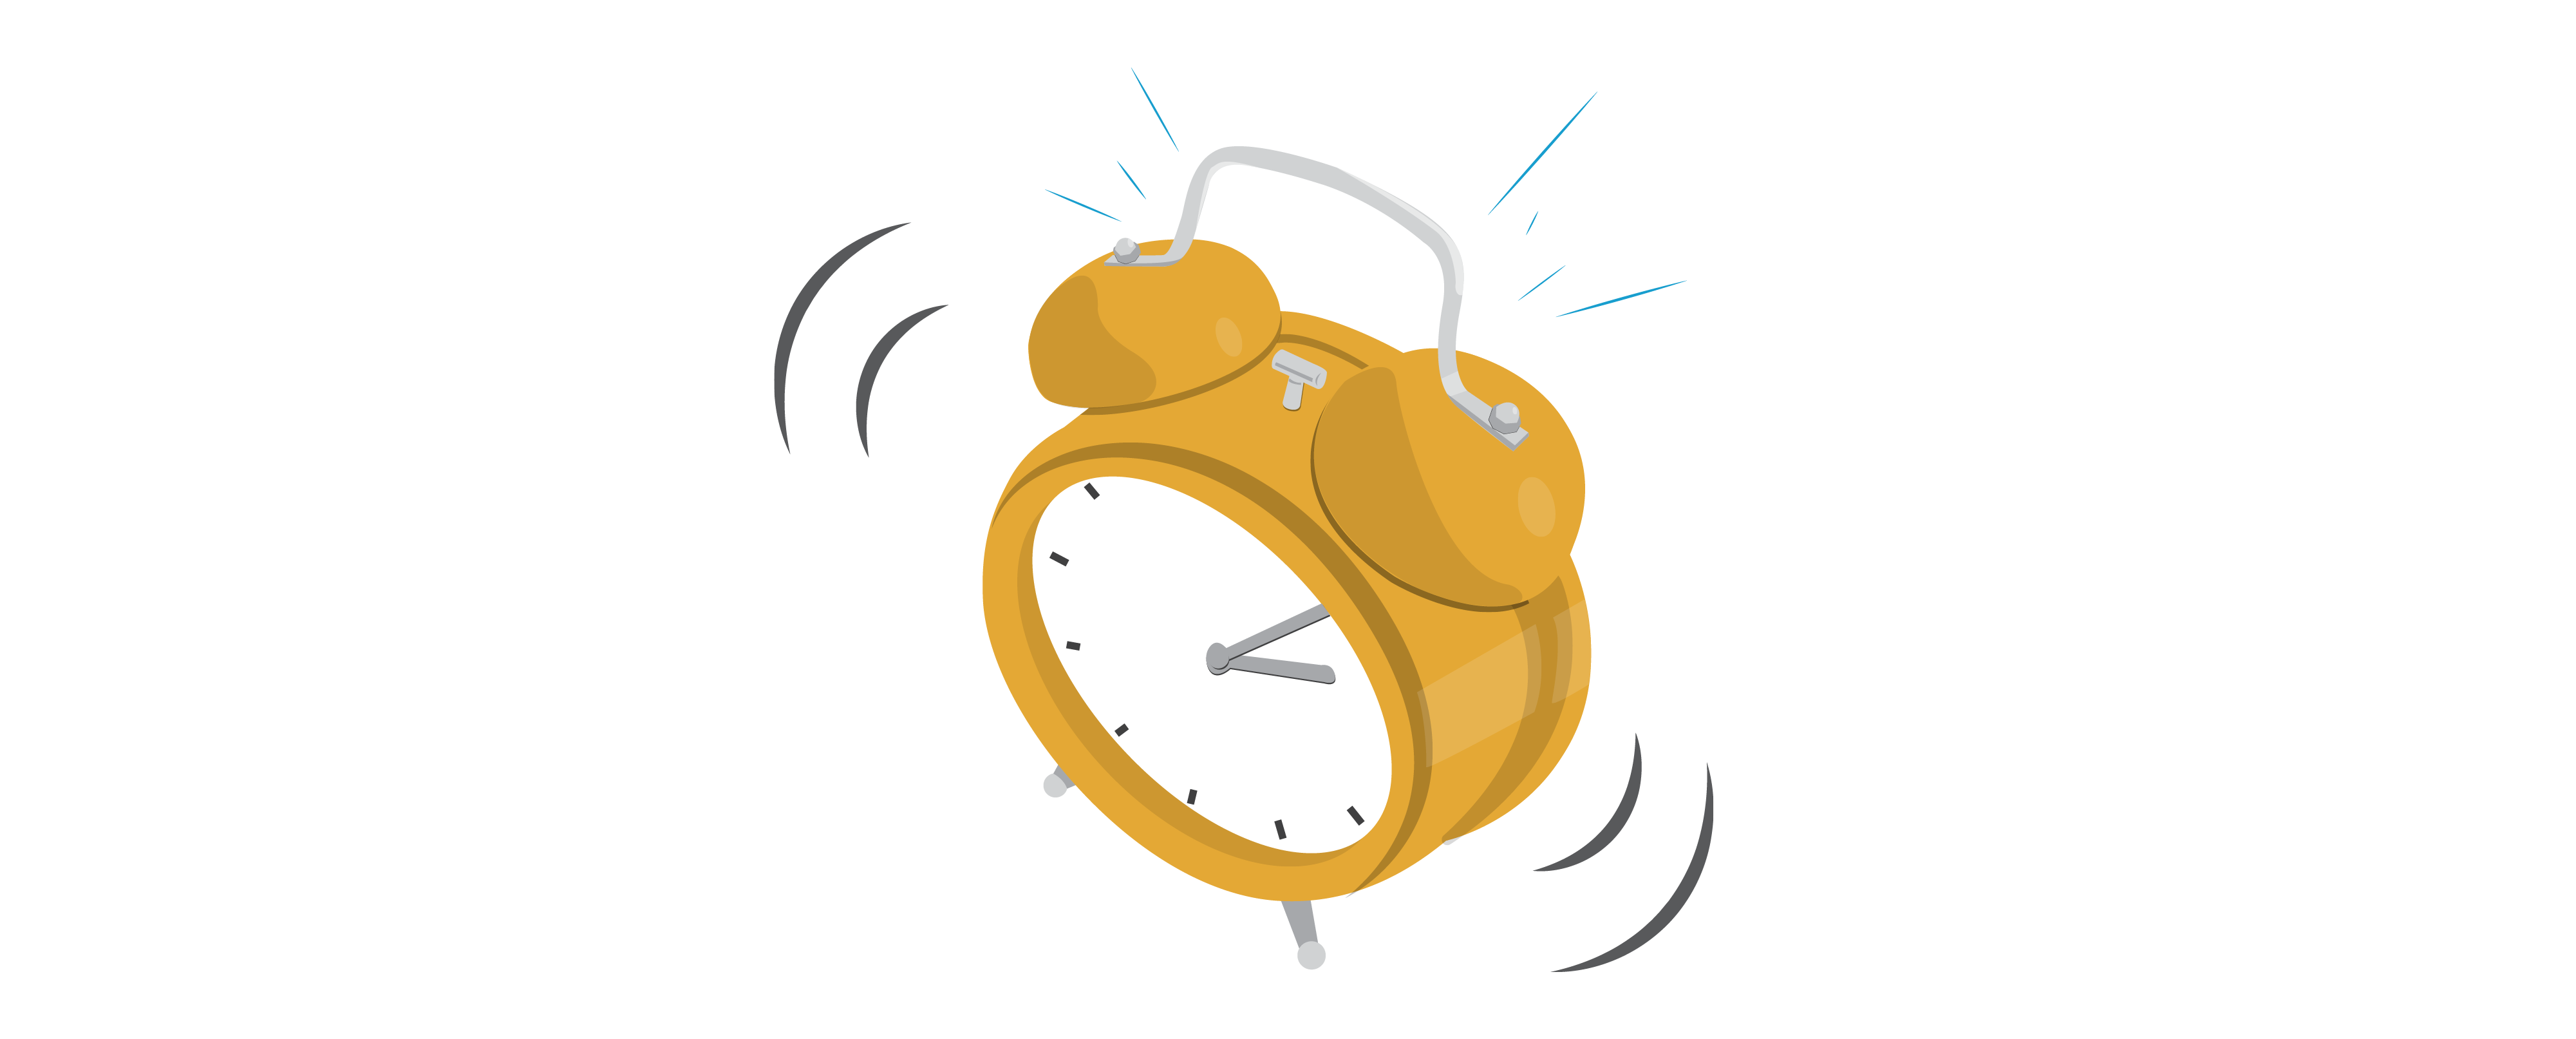 Yellow alarm clock with lines around it, showing sound being emitted from the clock.